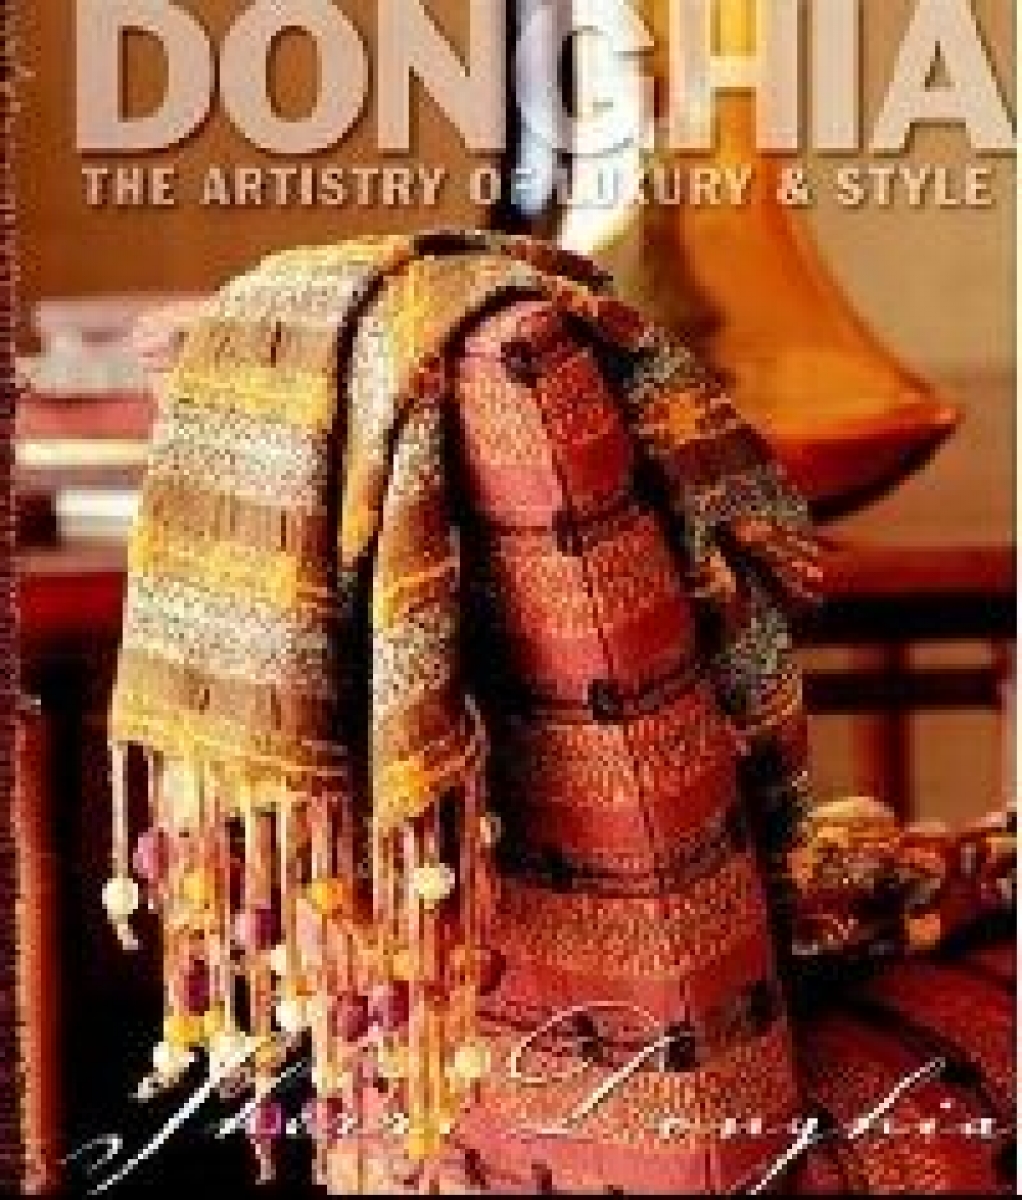 Sherri D. Donghia: The Artistry of Luxury and Style (:   ) 